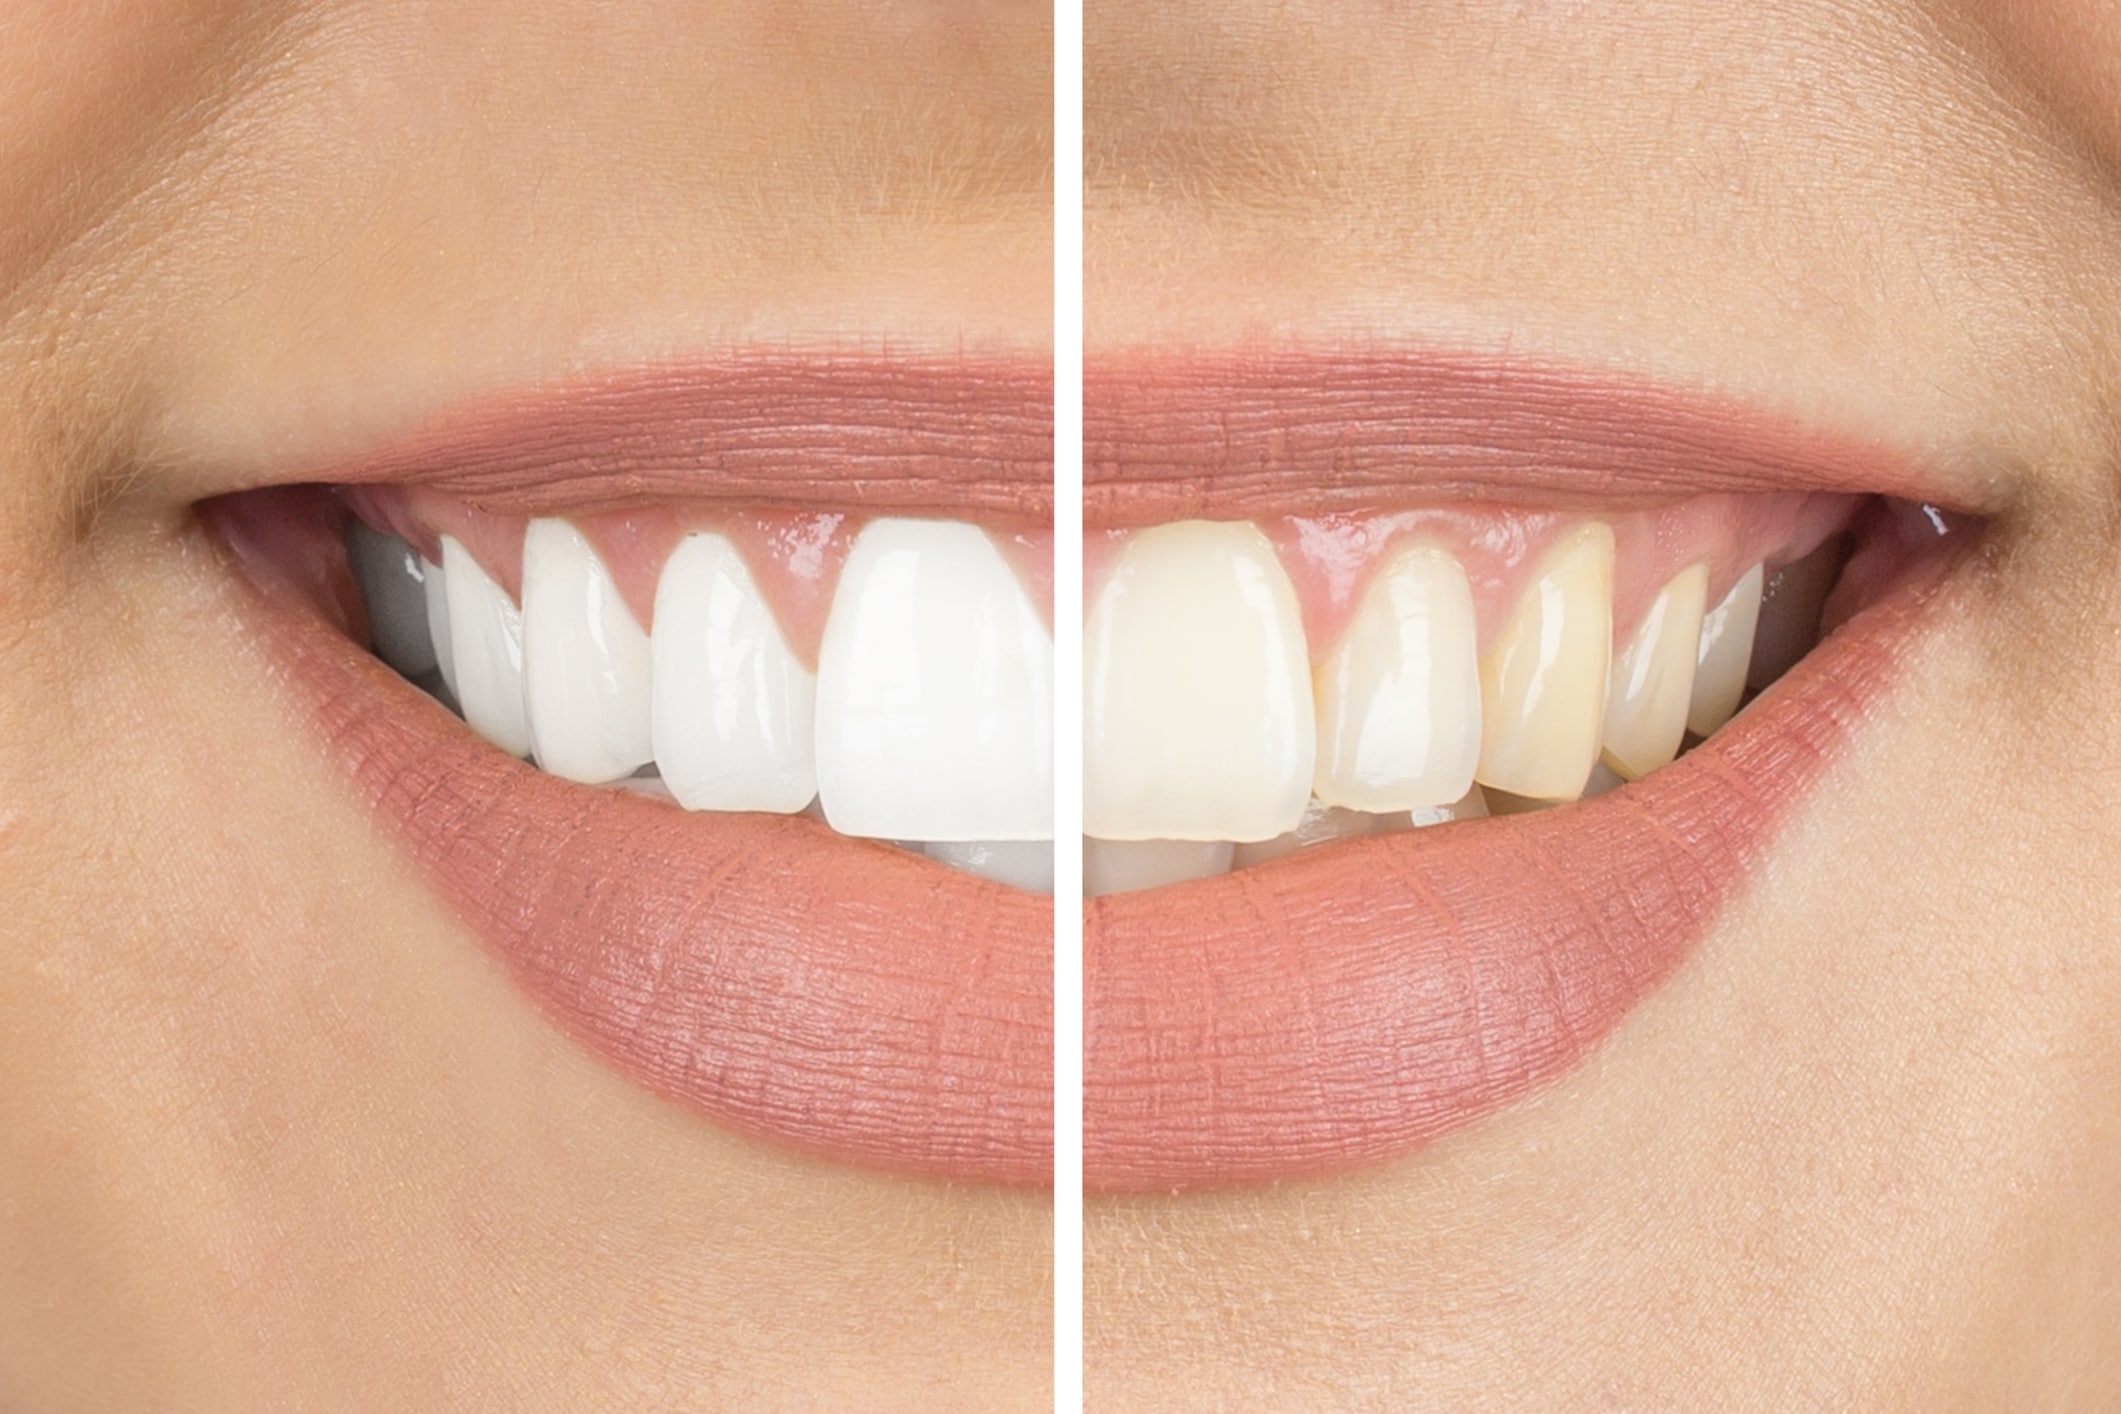 A before and after of a woman's mouth that underwent a teeth whitening procedure